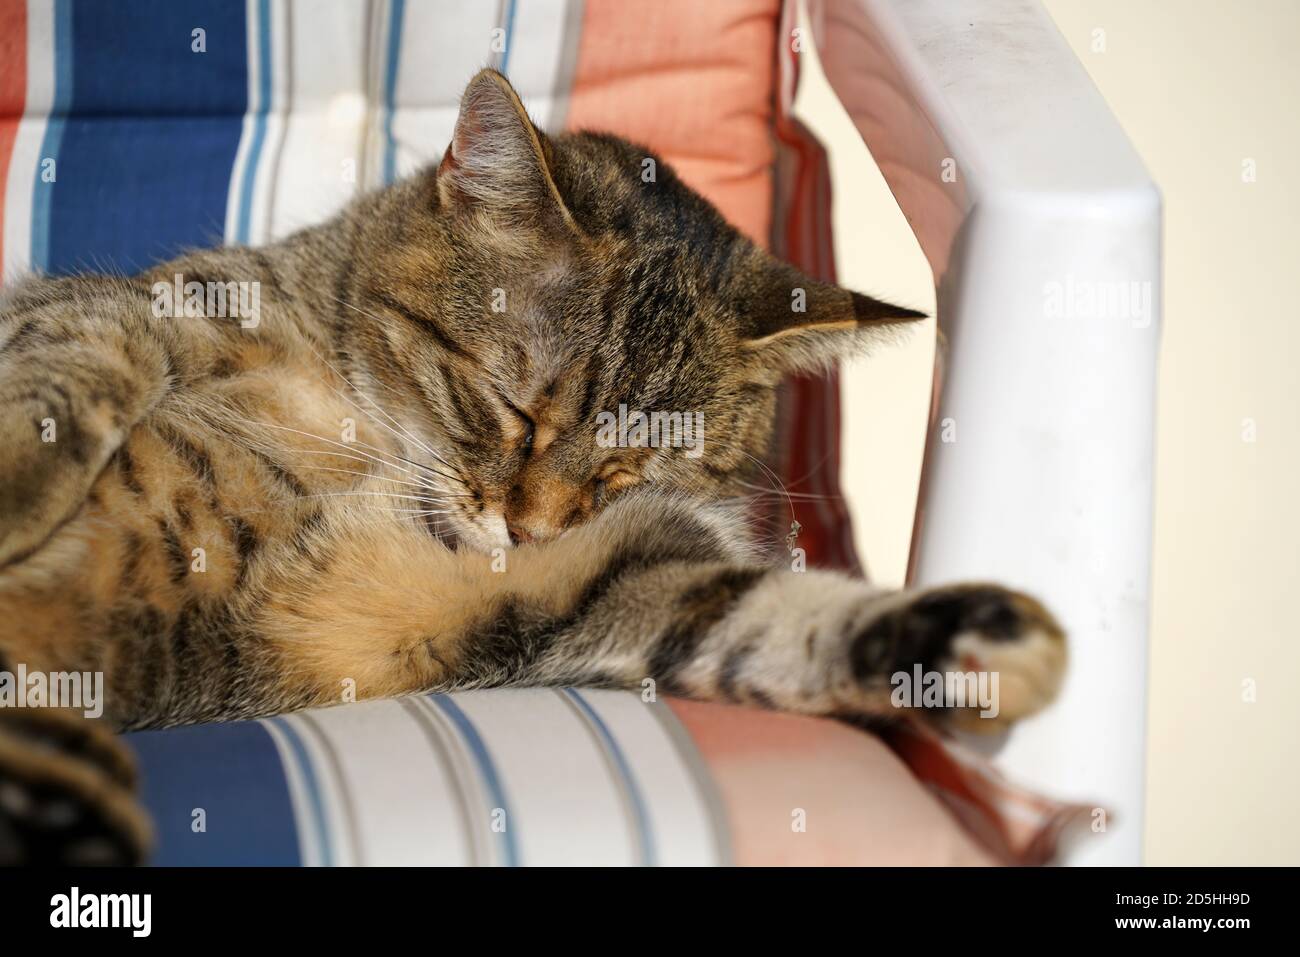 Closeup shot of the fluffy brown striped cat sleeping on the chair Stock Photo